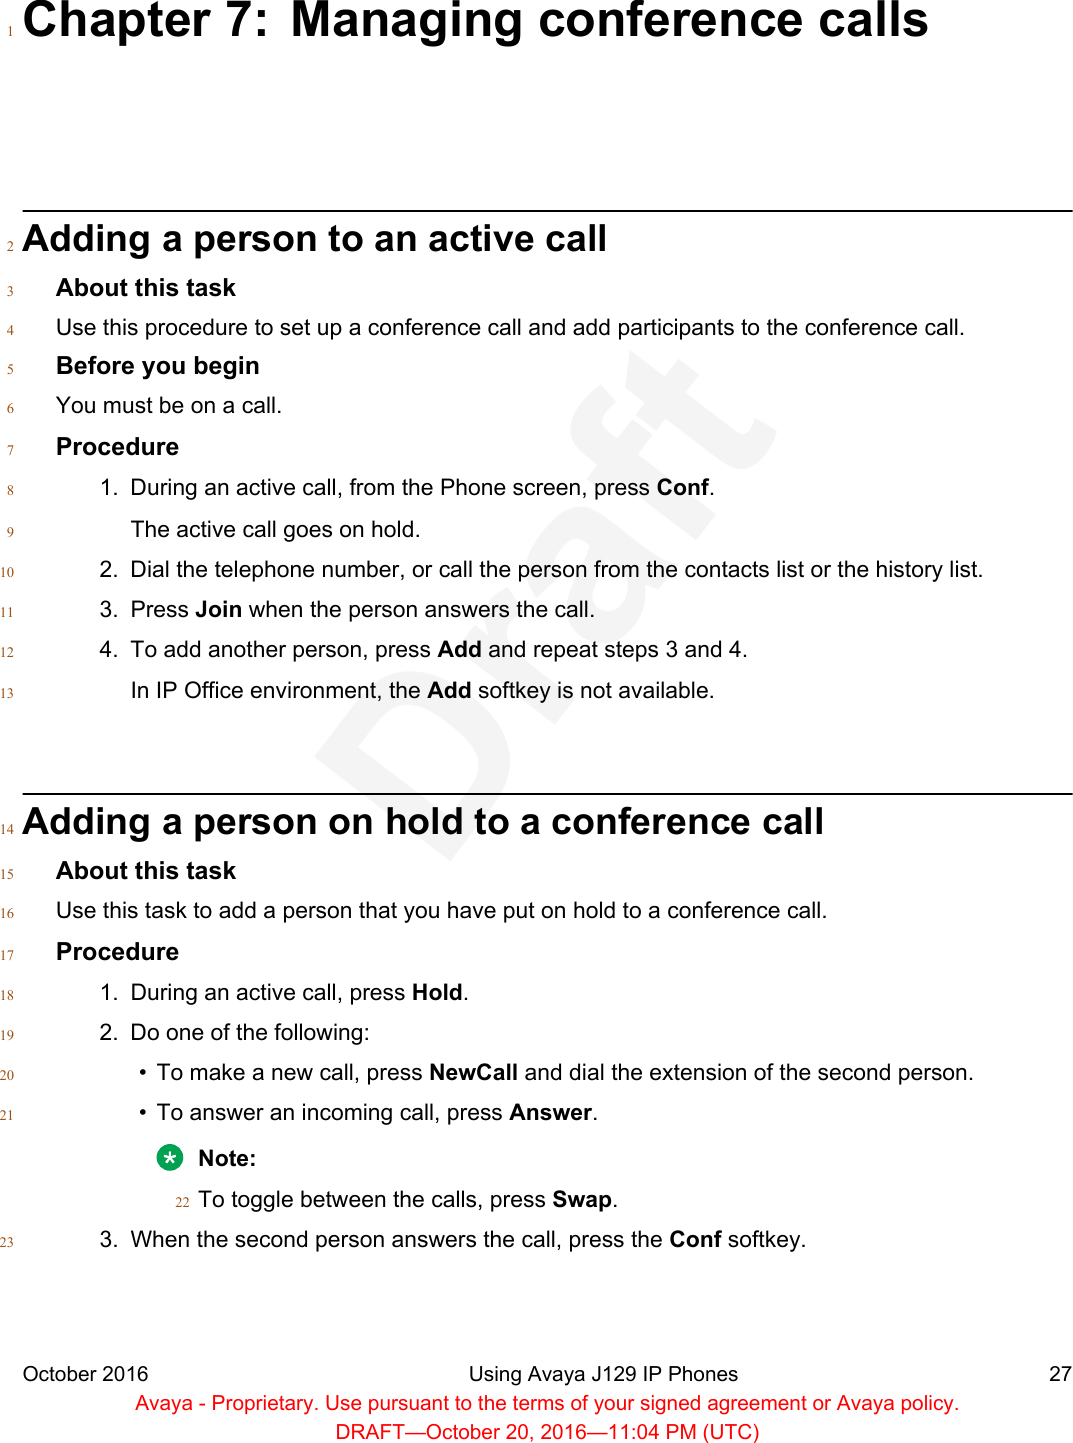 Chapter 7: Managing conference calls1Adding a person to an active call2About this task3Use this procedure to set up a conference call and add participants to the conference call.4Before you begin5You must be on a call.6Procedure71. During an active call, from the Phone screen, press Conf.8The active call goes on hold.92. Dial the telephone number, or call the person from the contacts list or the history list.103. Press Join when the person answers the call.114. To add another person, press Add and repeat steps 3 and 4.12In IP Office environment, the Add softkey is not available.13Adding a person on hold to a conference call14About this task15Use this task to add a person that you have put on hold to a conference call.16Procedure171. During an active call, press Hold.182. Do one of the following:19• To make a new call, press NewCall and dial the extension of the second person.20• To answer an incoming call, press Answer.21Note:To toggle between the calls, press Swap.223. When the second person answers the call, press the Conf softkey.23October 2016 Using Avaya J129 IP Phones 27Avaya - Proprietary. Use pursuant to the terms of your signed agreement or Avaya policy.DRAFT—October 20, 2016—11:04 PM (UTC)